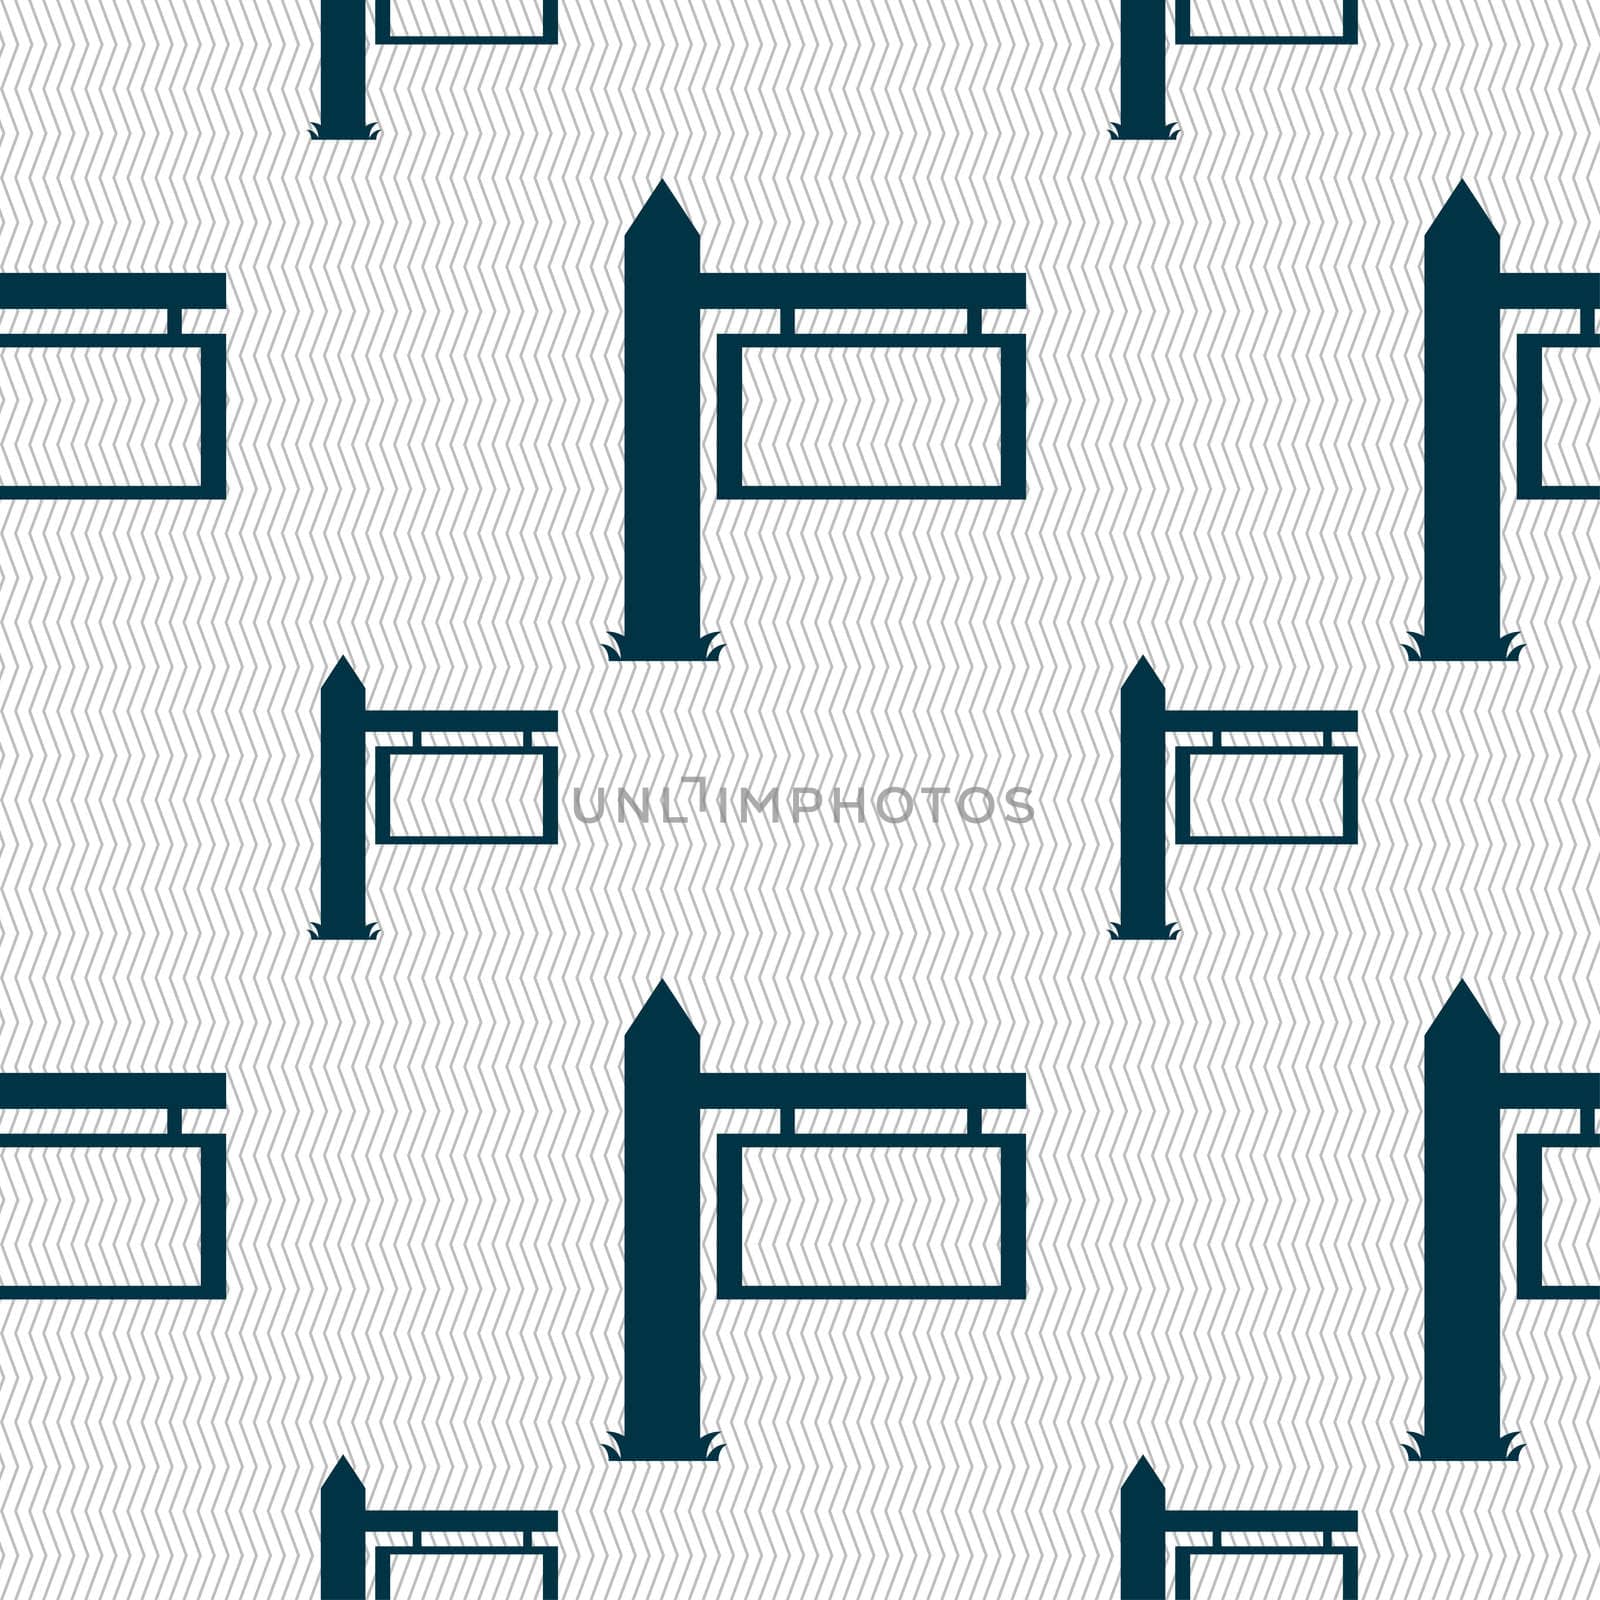 Information Road Sign icon sign. Seamless pattern with geometric texture. illustration